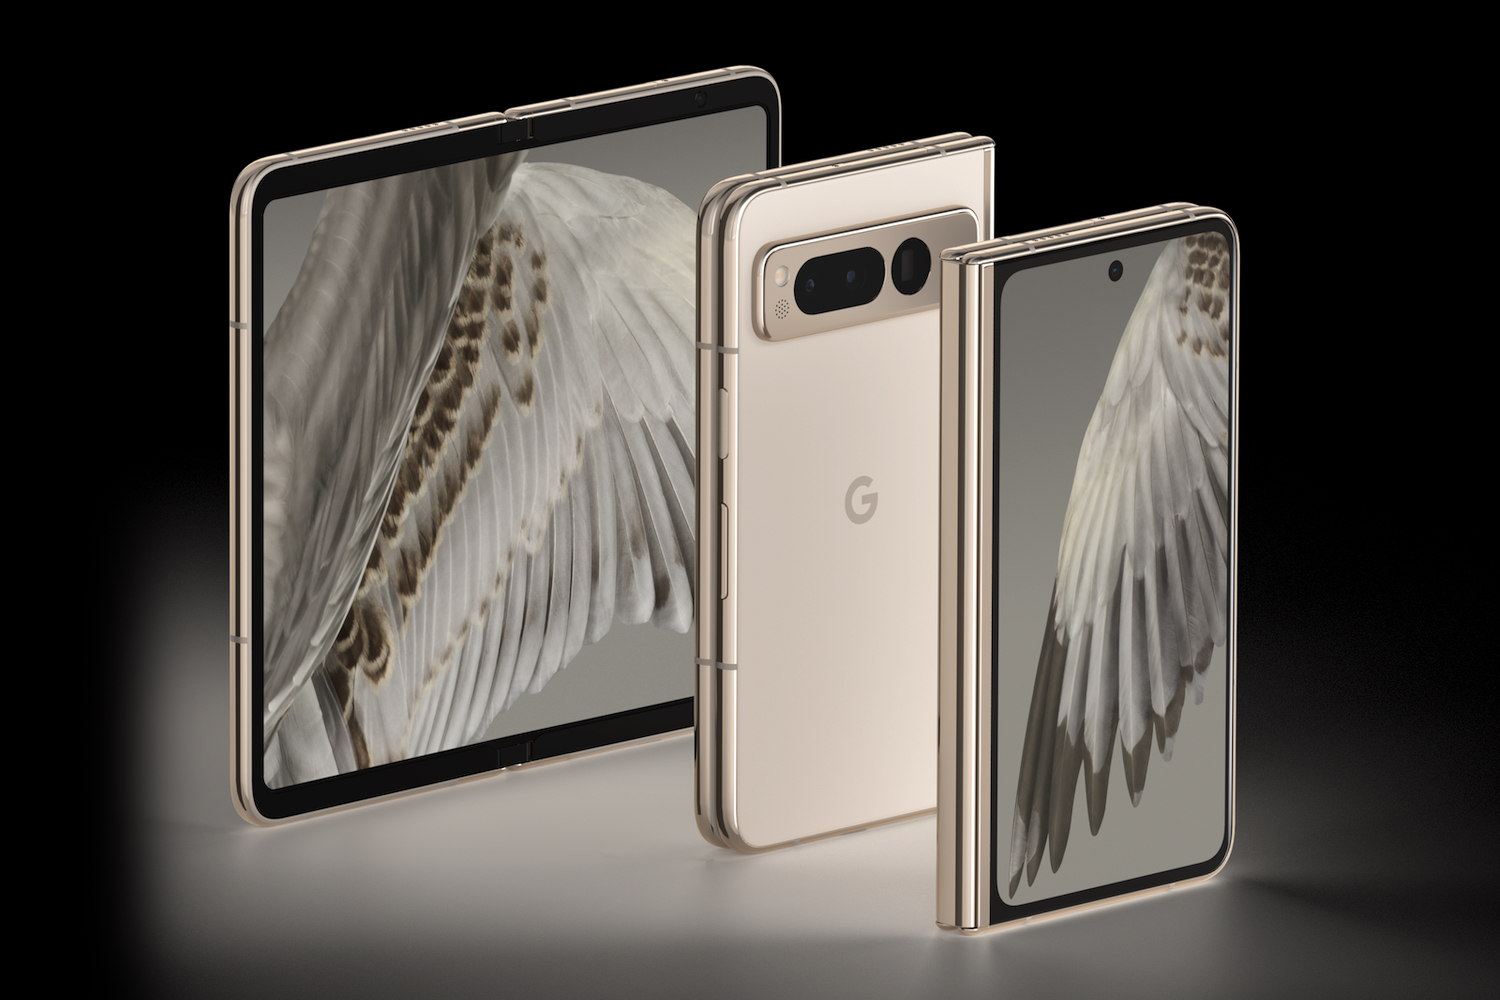 A promo image showing the Google Pixel Fold, open and closed.